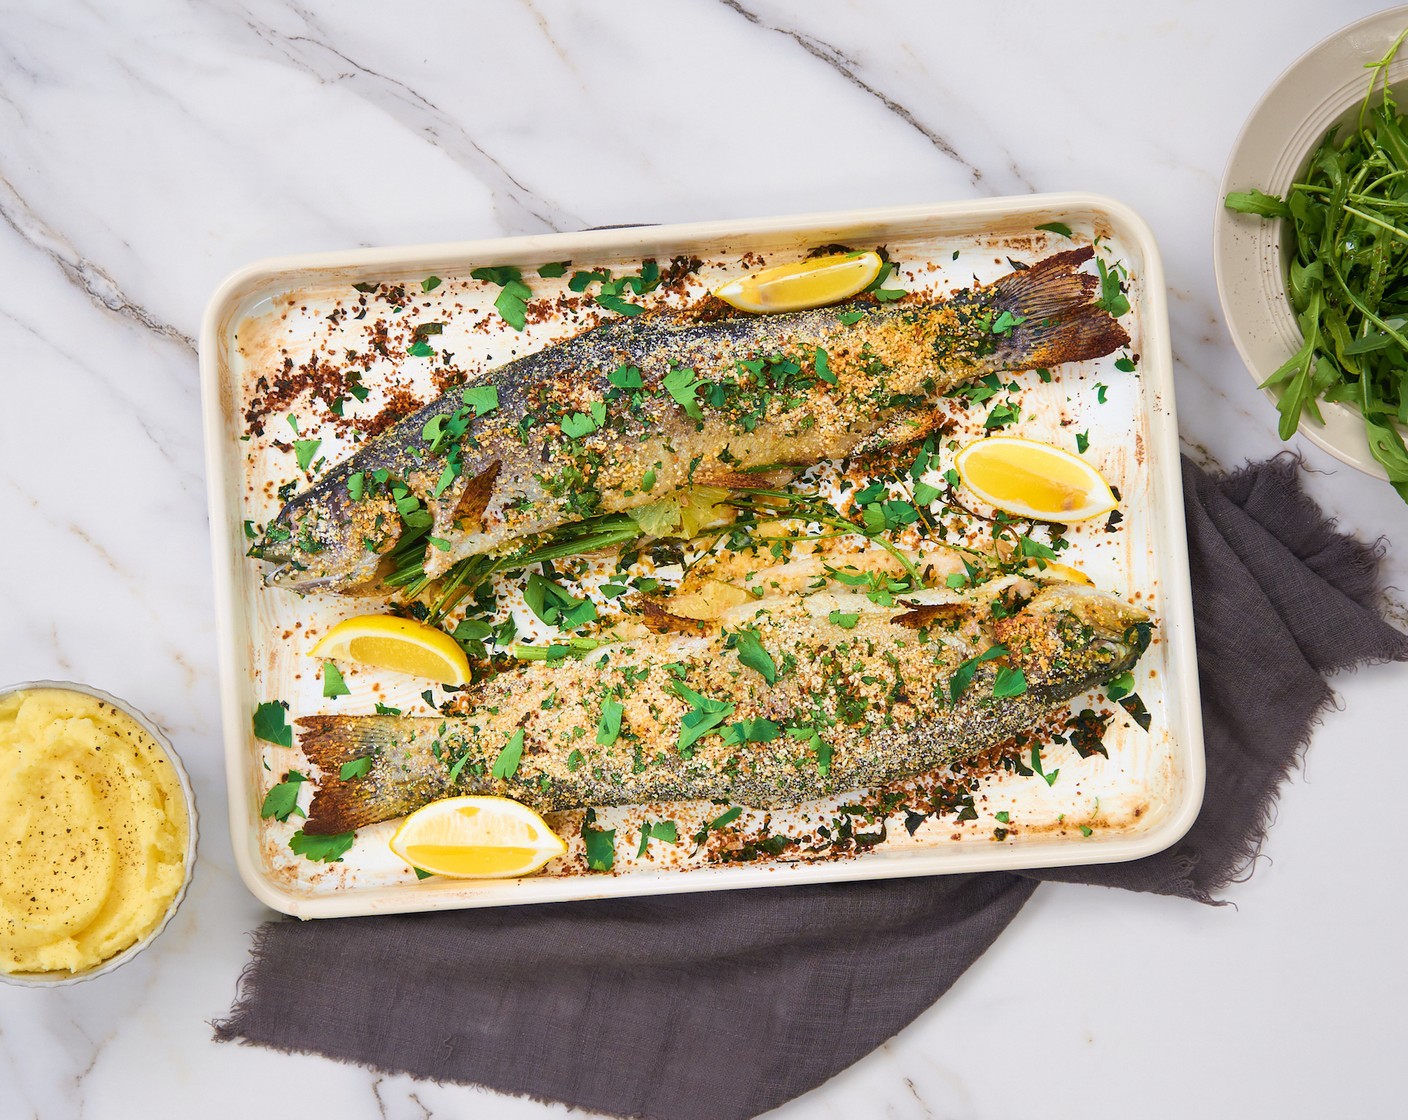 Baked Parsley Trout